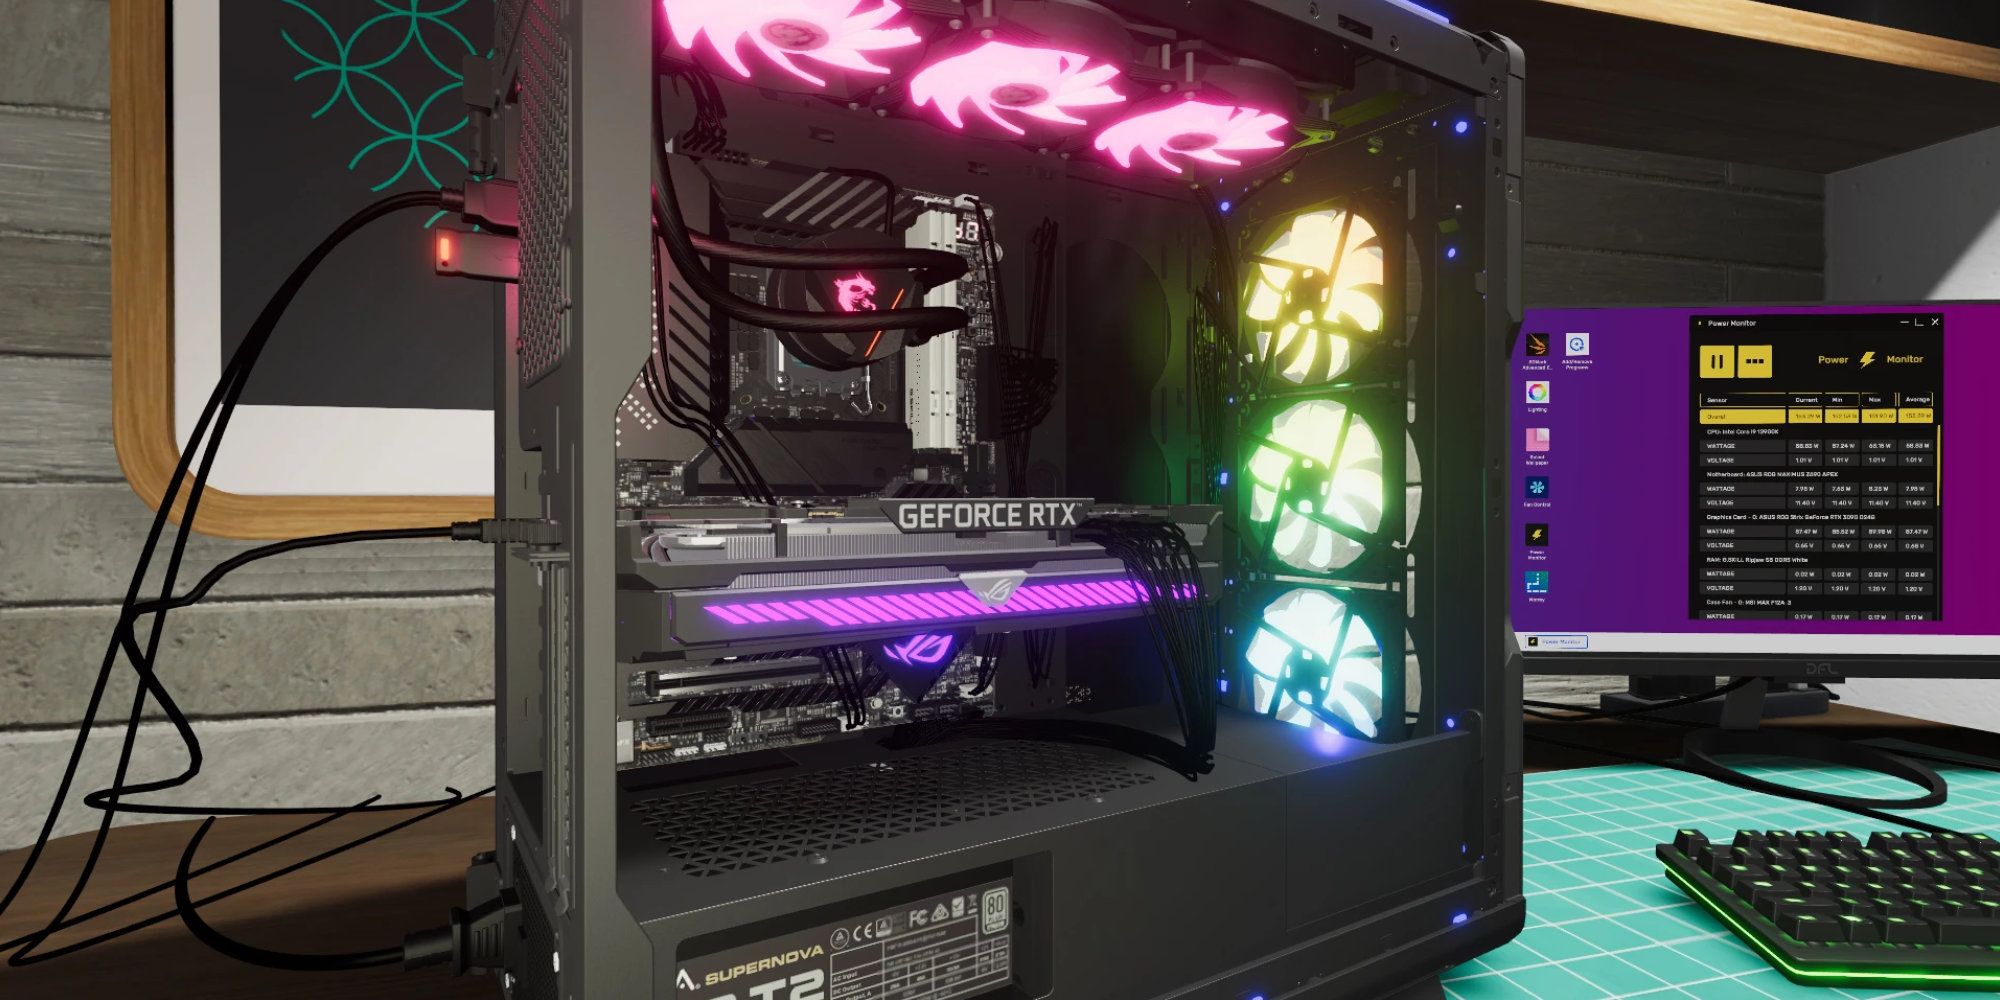 A multicolored light system illuminating the inside of a PC